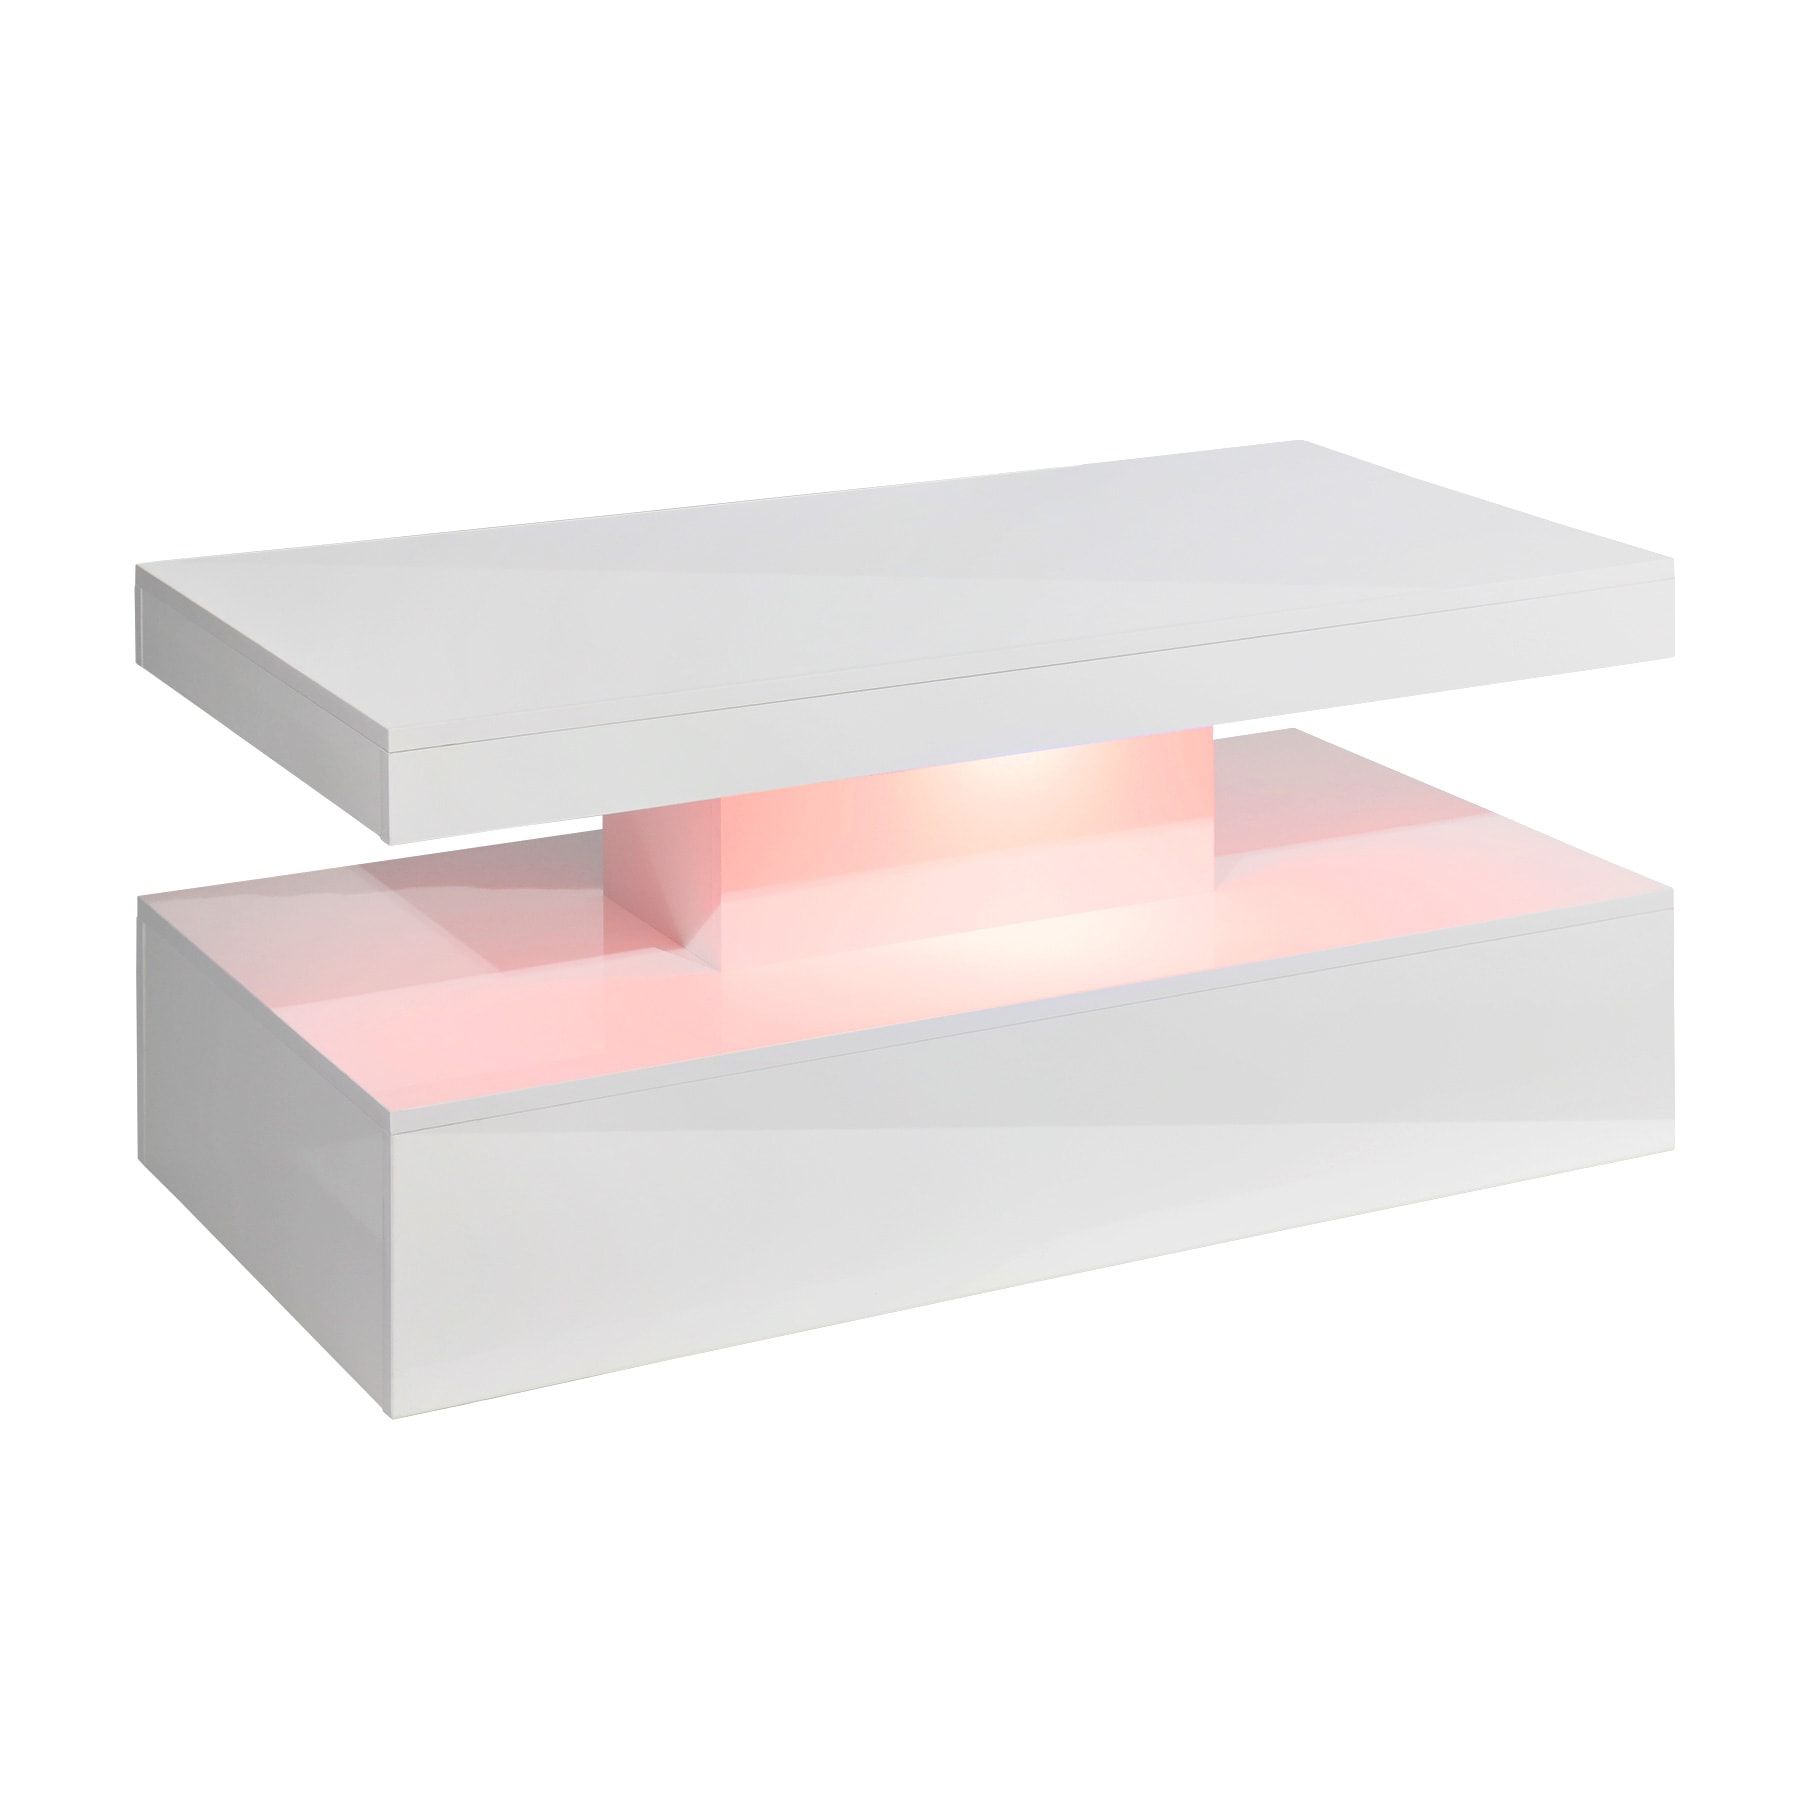 White Coffee Table With Rgb Led Lighting | Mmt Furniture In Rectangular Led Coffee Tables (View 11 of 15)